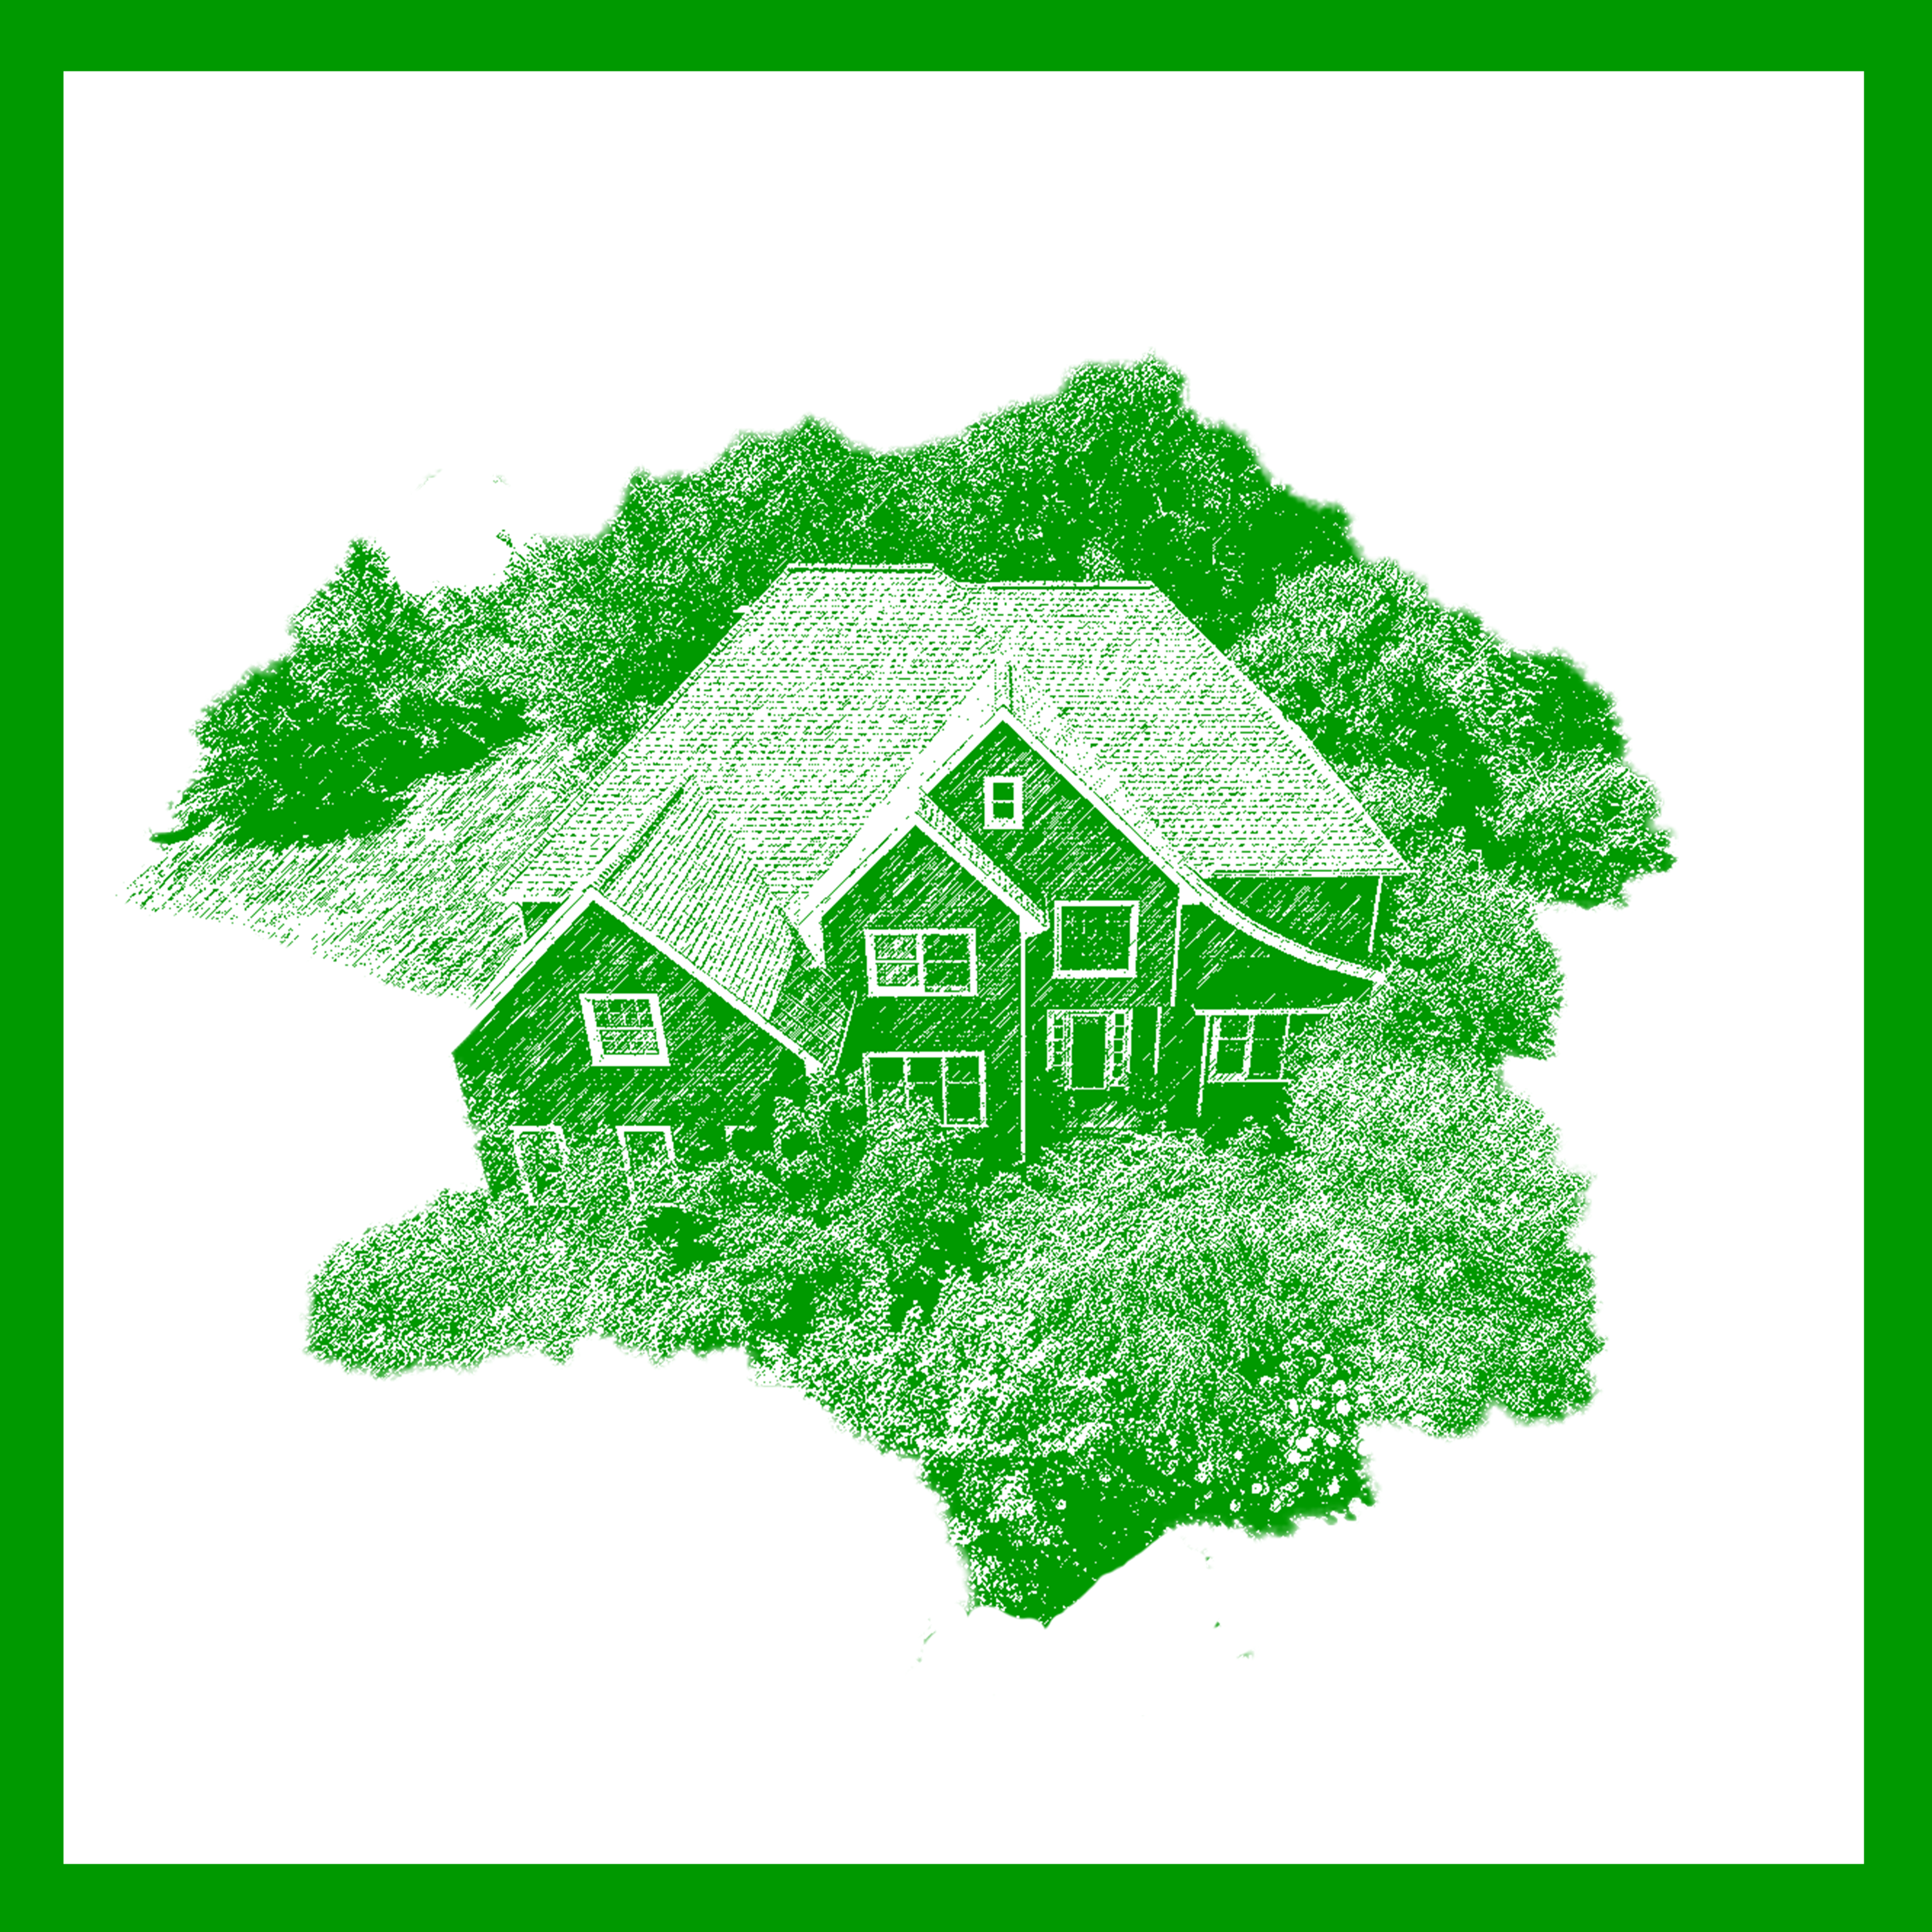 House with plantings for privacy screening icon